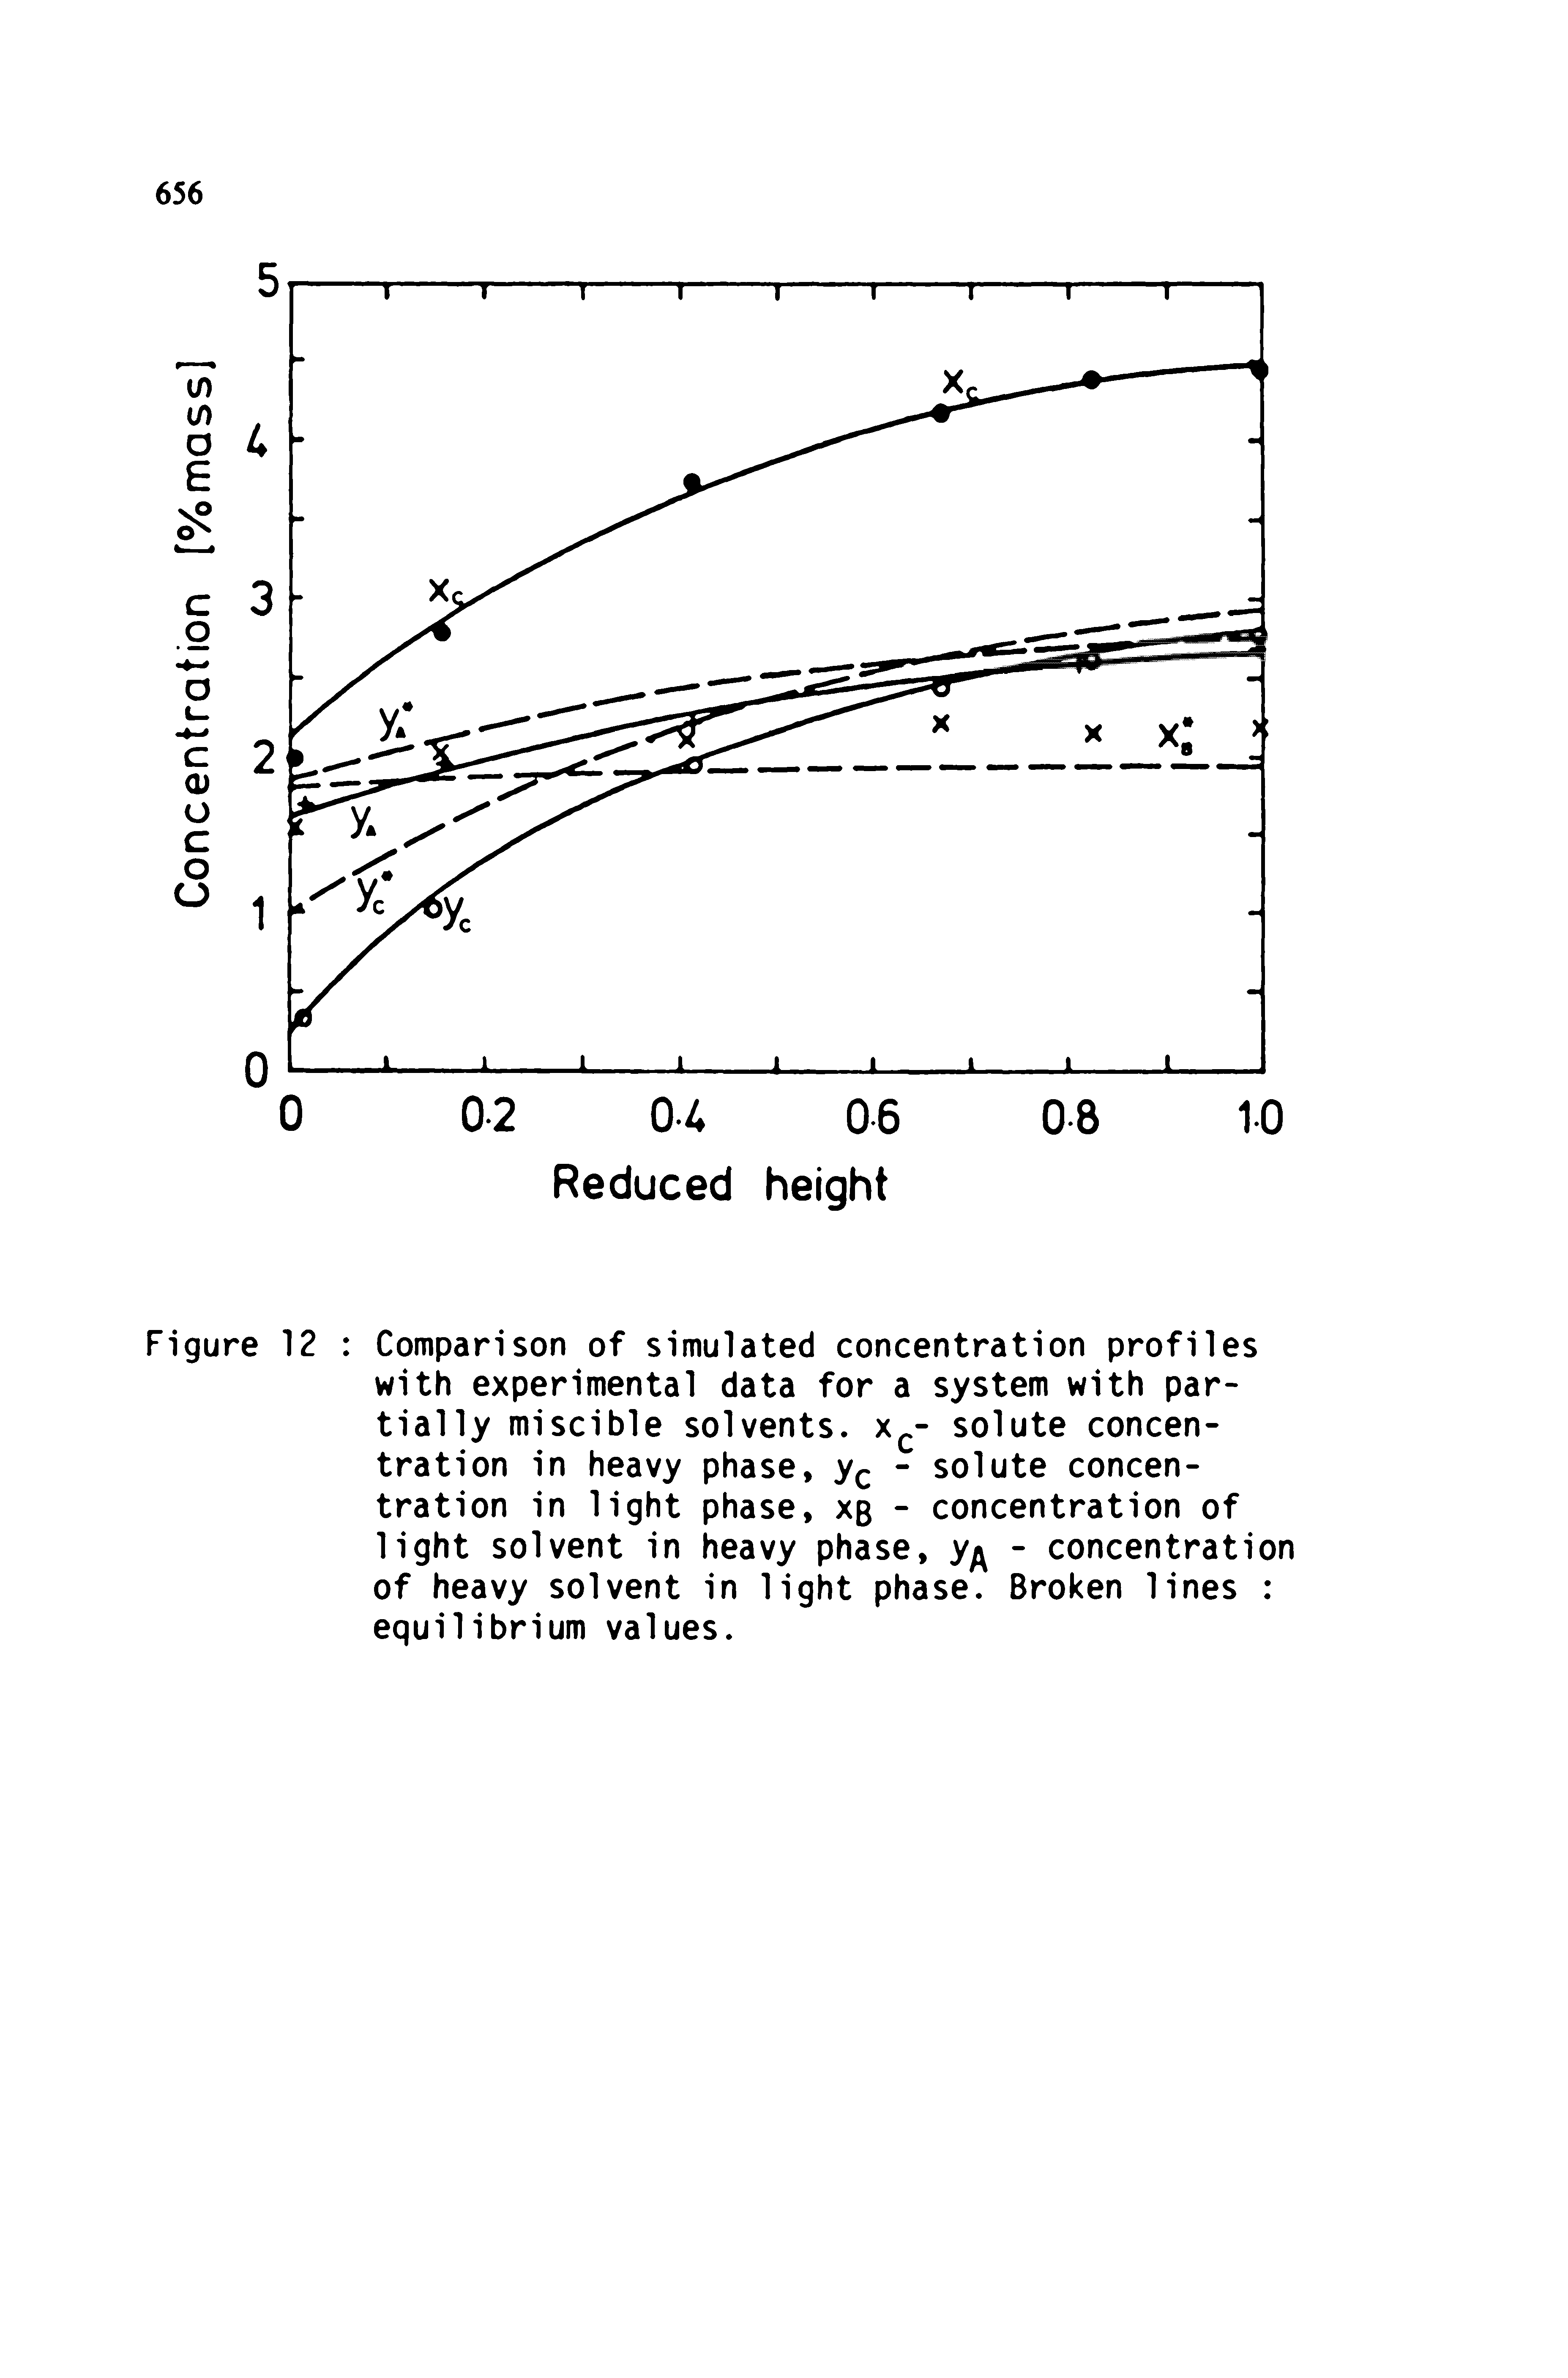 Figure 12 Comparison of simulated concentration profiles with experimental data for a system with partially miscible solvents, x - solute concentration in heavy phase, y - solute concentration in light phase, xb - concentration of light solvent in heavy phase, yf - concentration of heavy solvent in light phase. Broken lines equilibrium values.